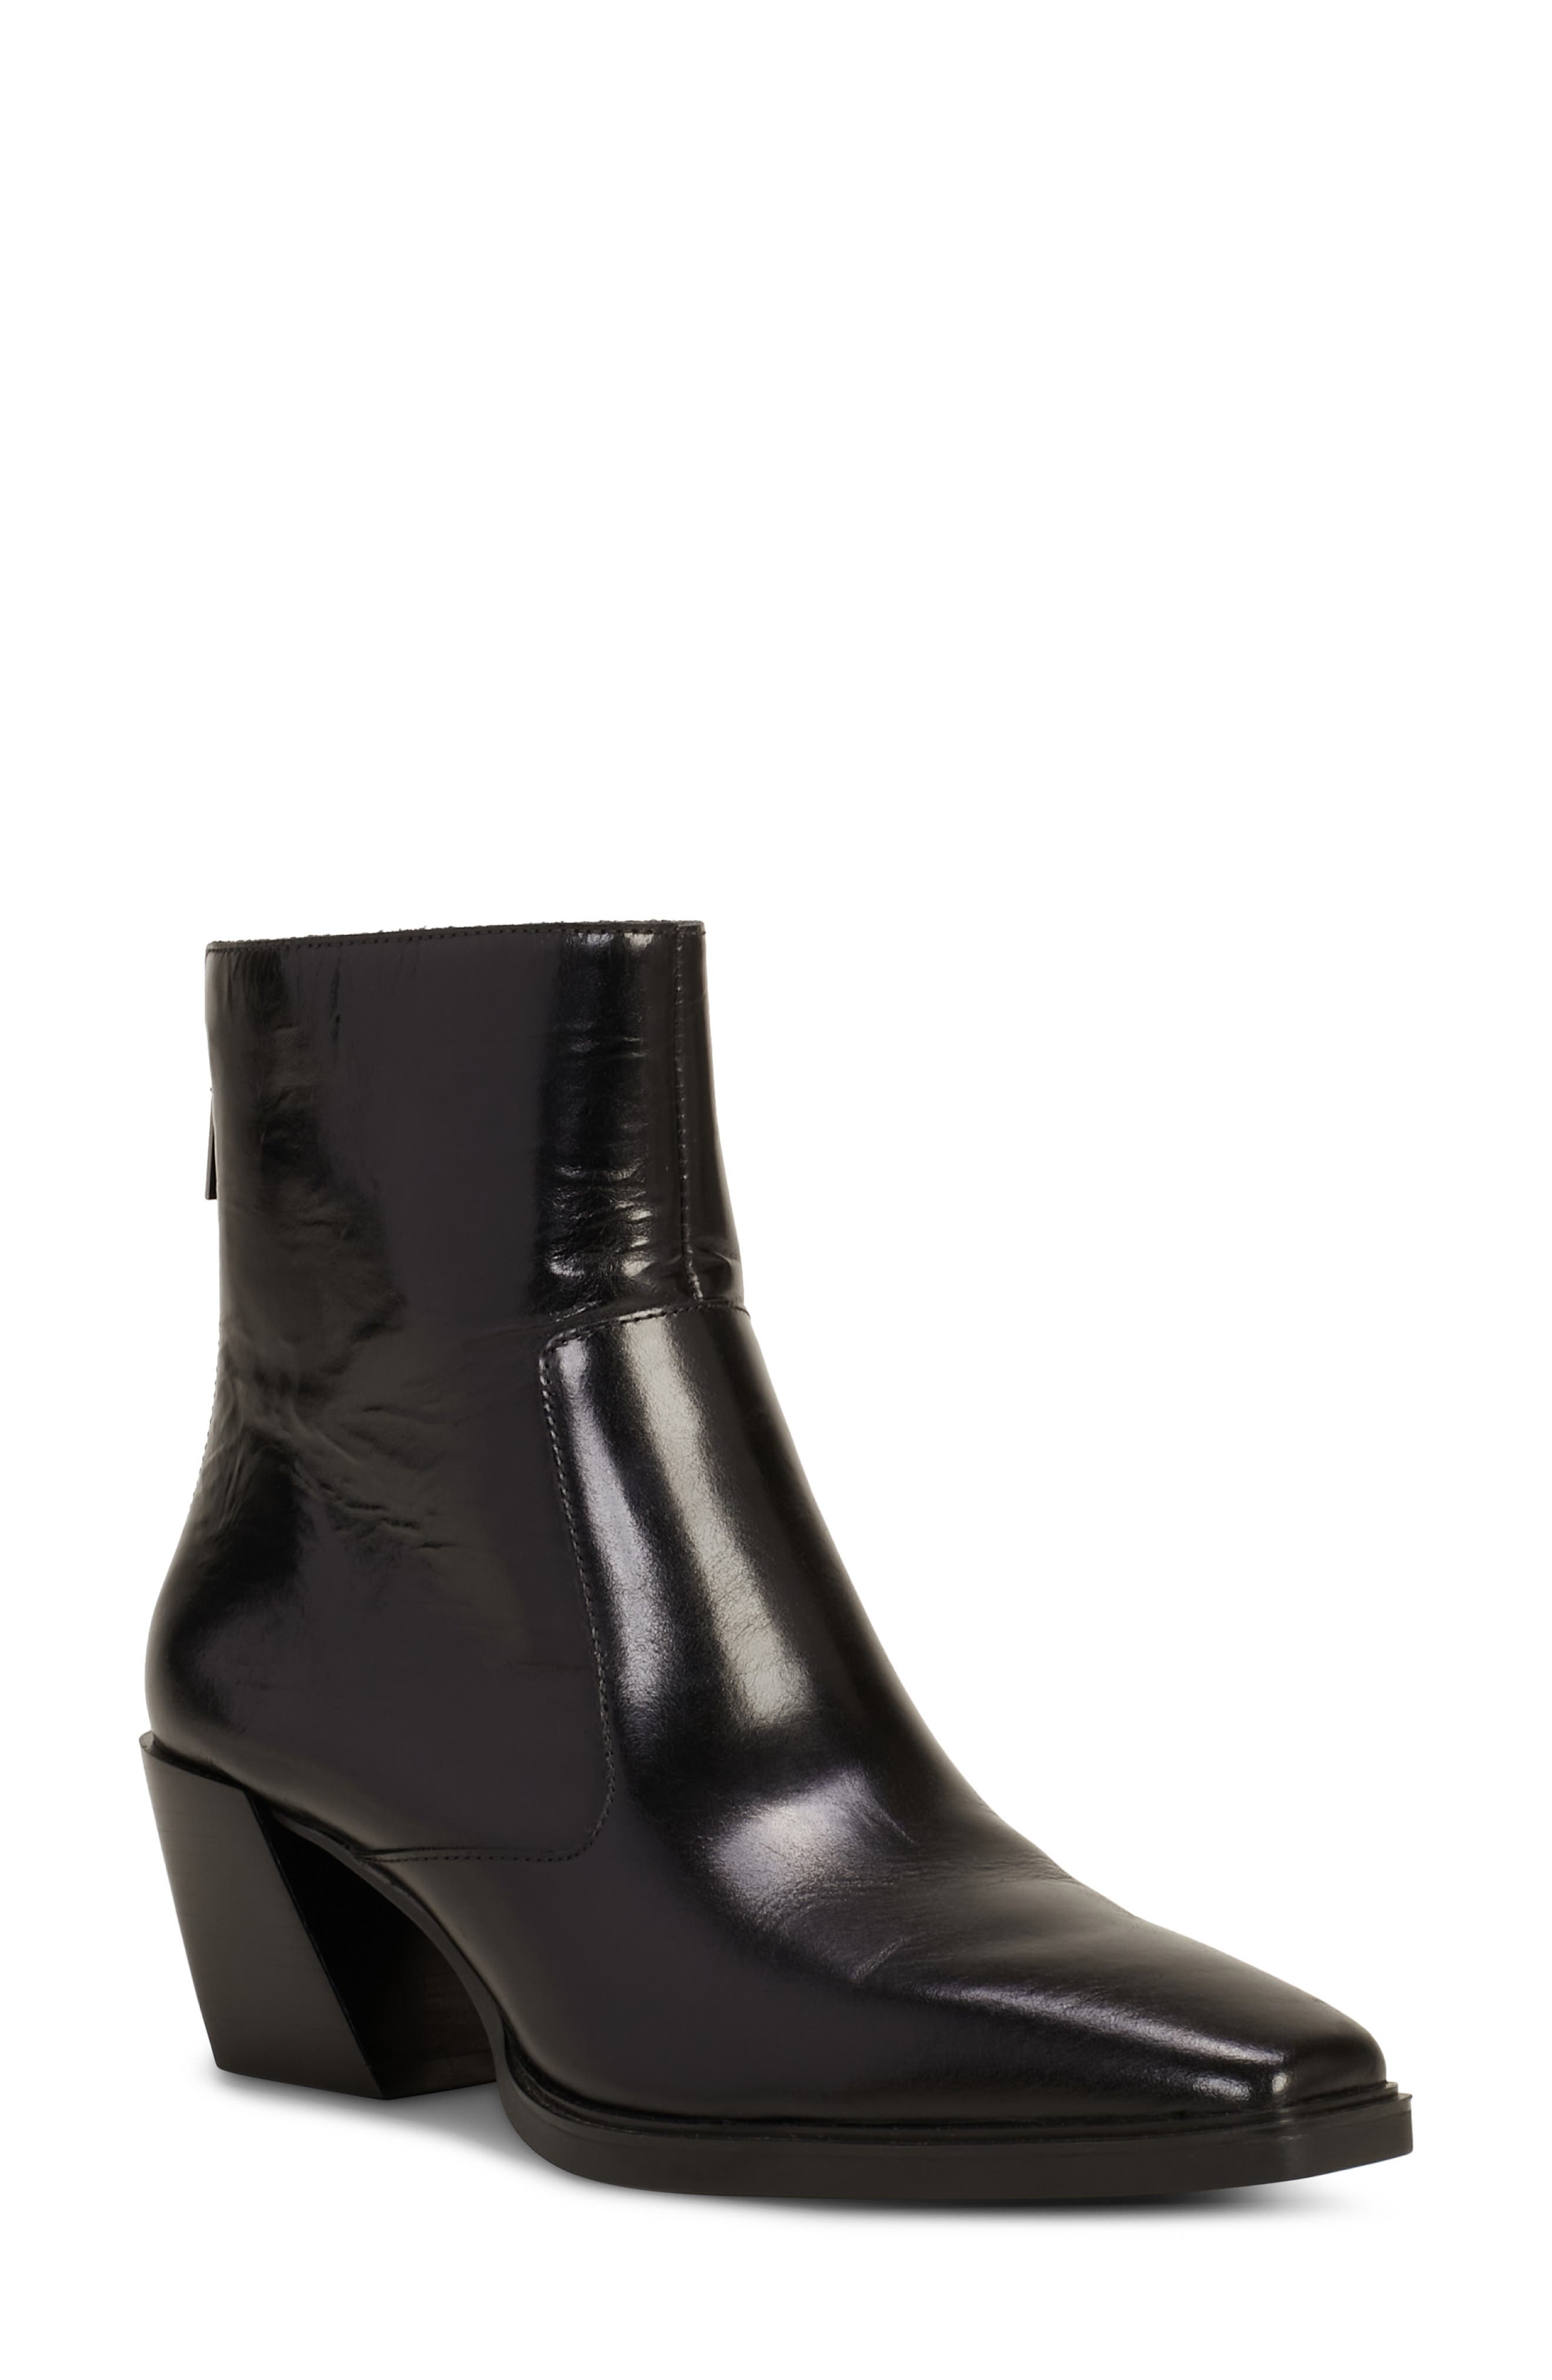 Vagabond Women#39;s Giselle Leather Heeled Ankle Boots - Black